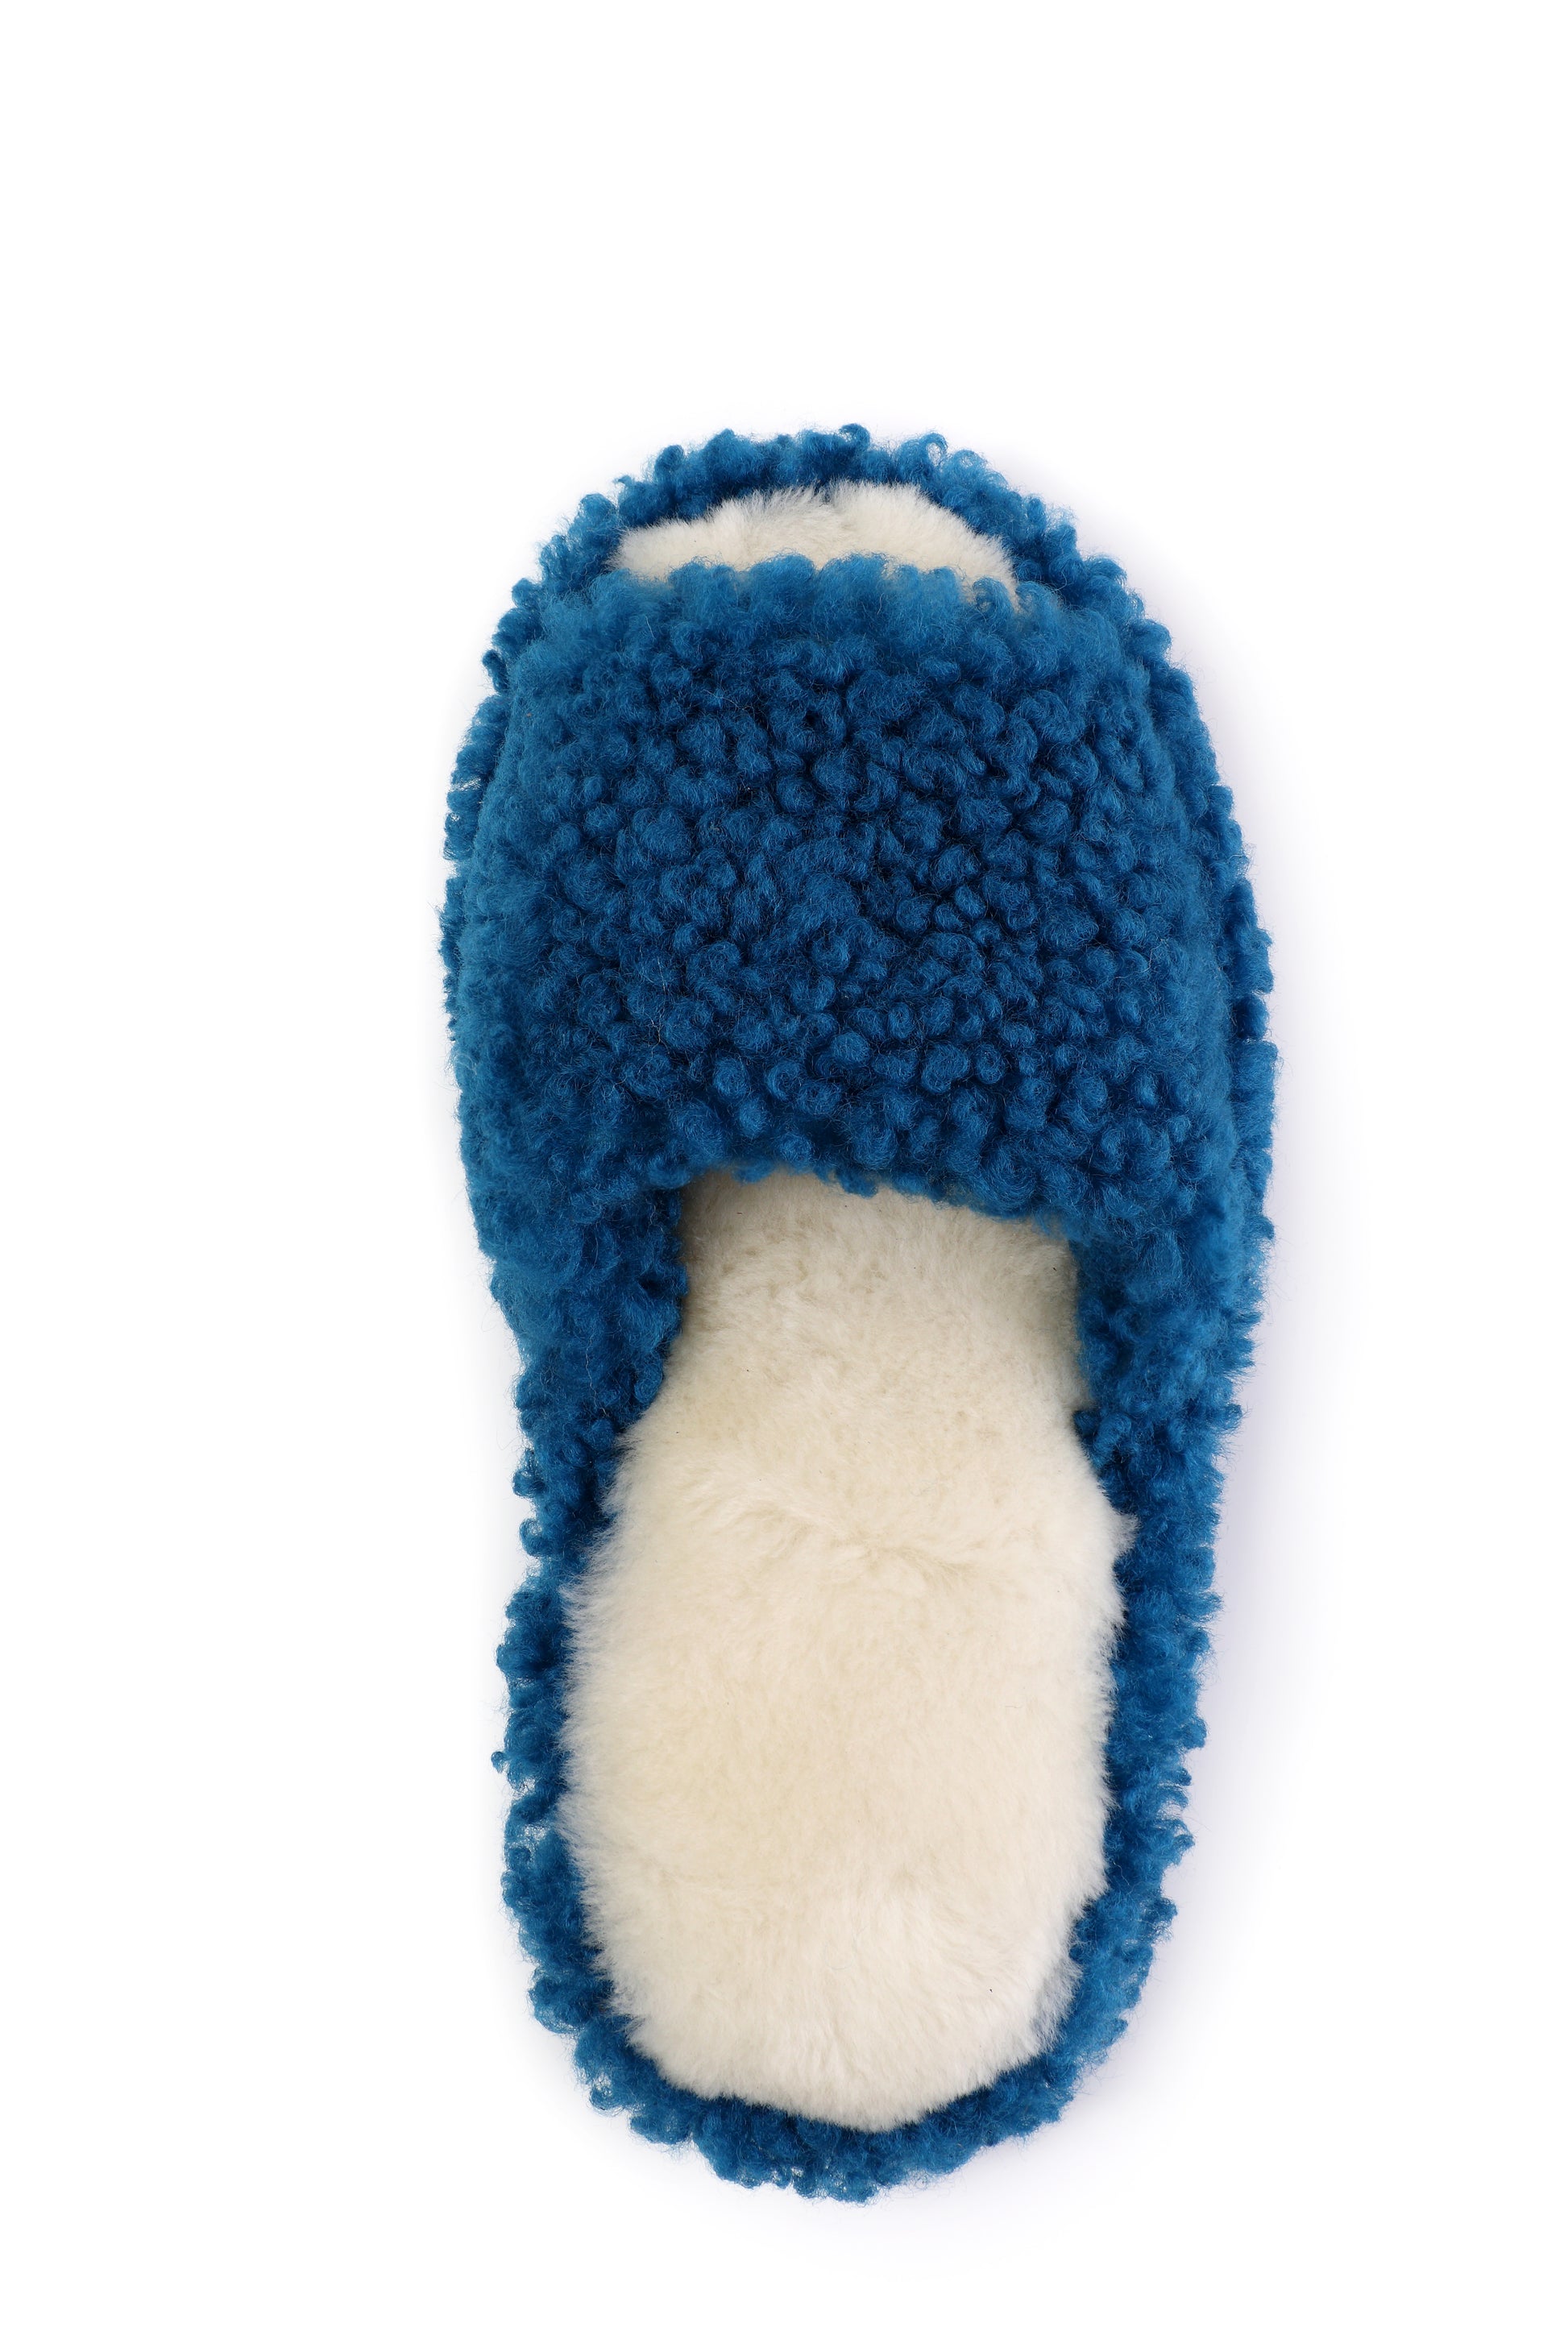 Open Toe Soft Blue Sheepskin Slippers with White Fur Lining